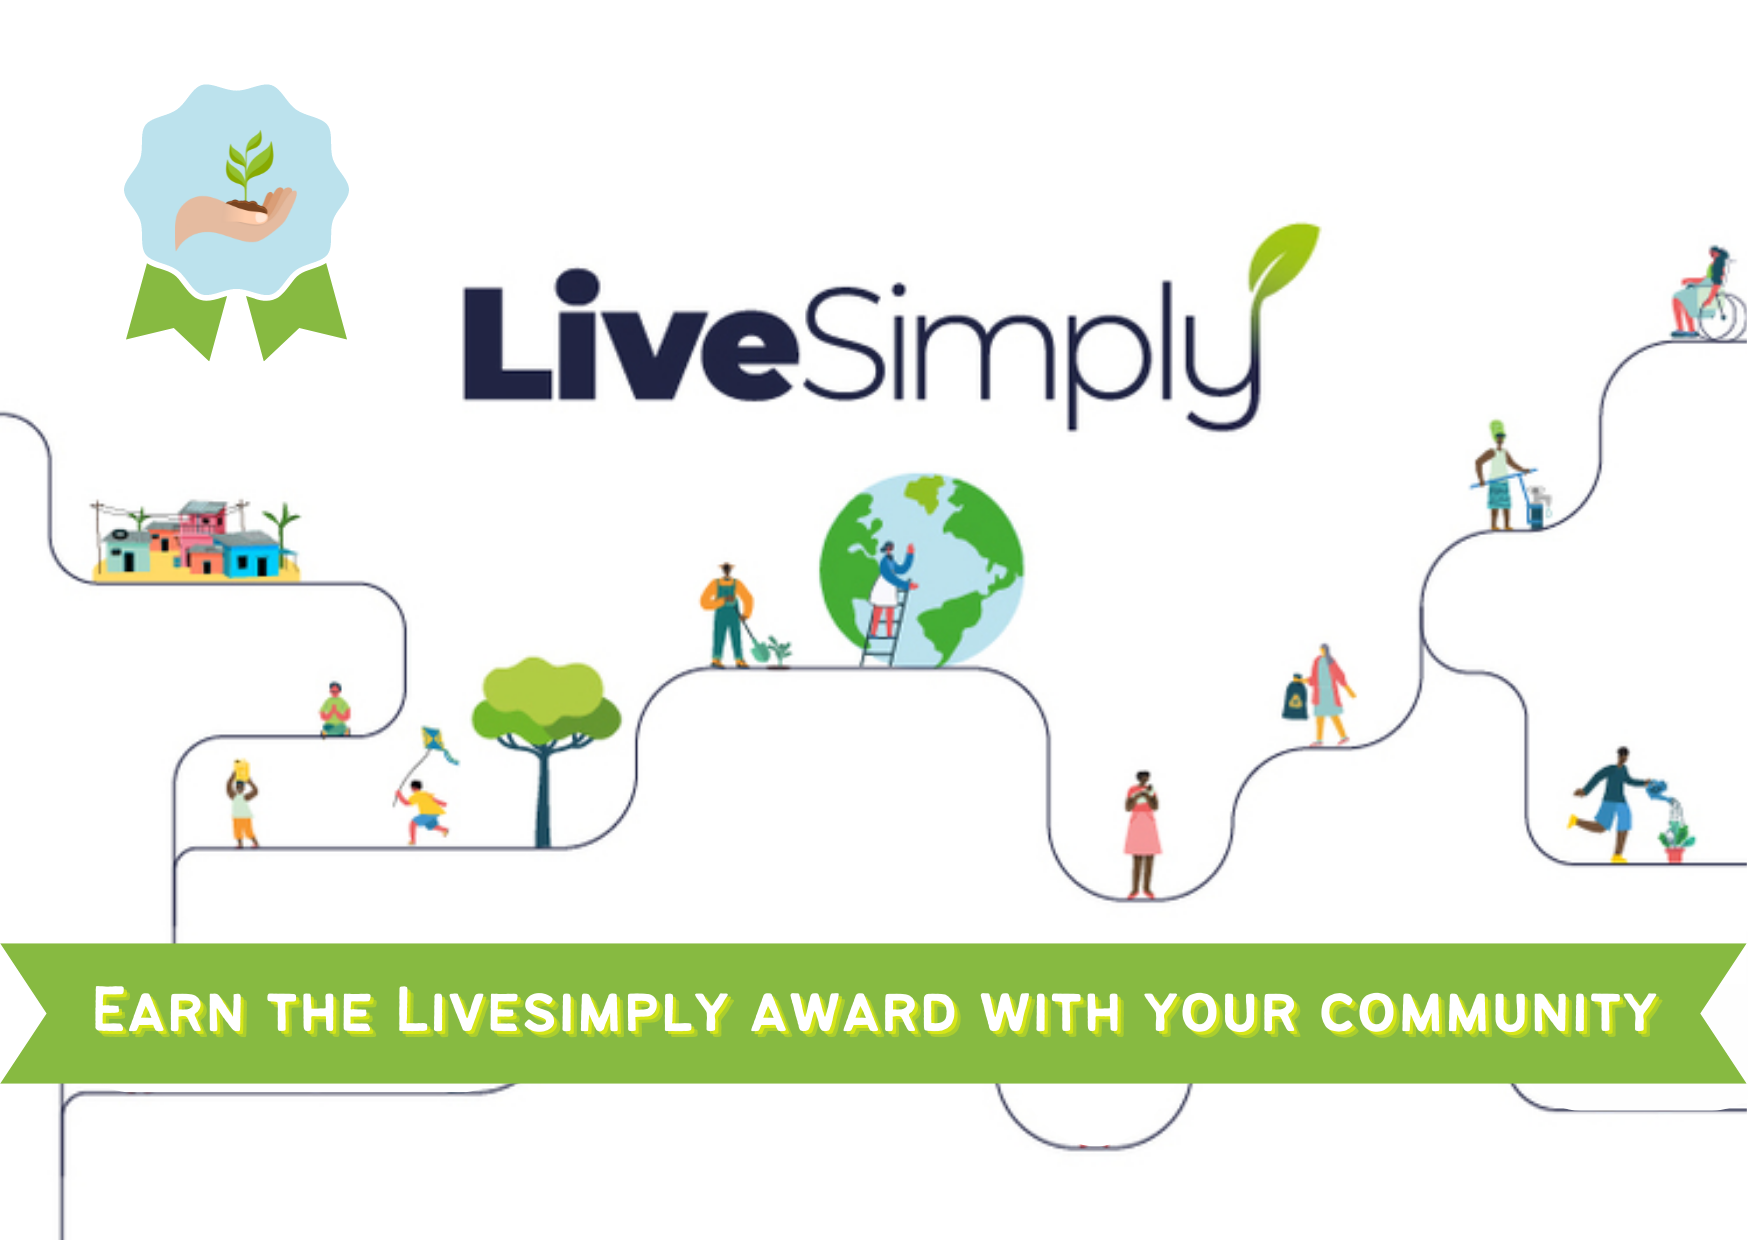 Earn the Livesimply award with your community